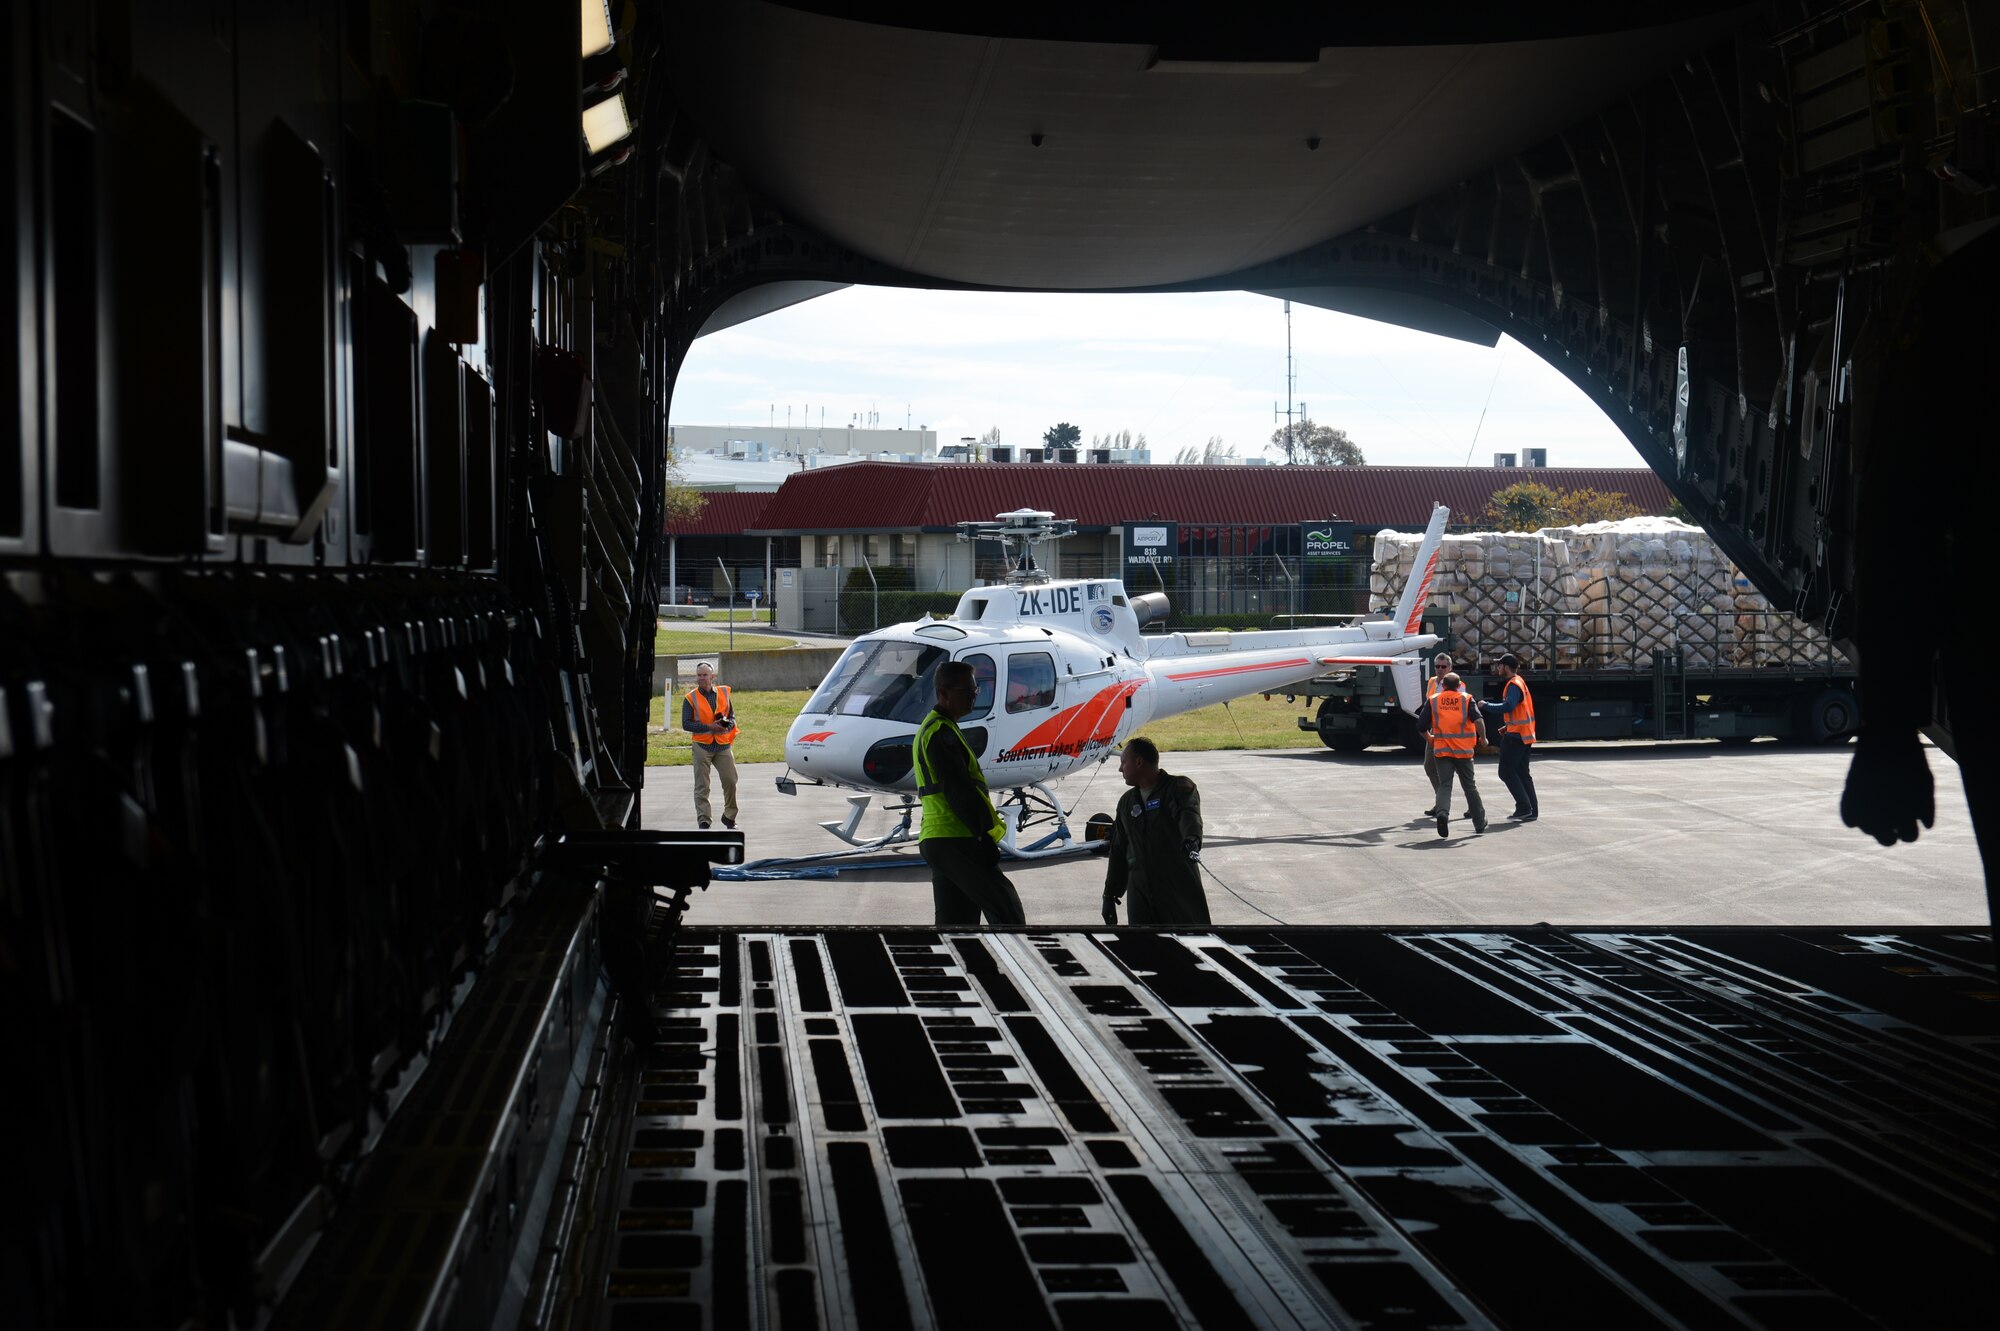 An Eurocopter AS350 B2 single engine helicopter without its blades attached, along with pallets of cargo, are staged behind a Joint Base Lewis-McChord C-17 Globemaster III prior to being loaded Oct. 8th, 2014, at Christchurch, New Zealand. The helicopter was transported along with the cargo and 62 passengers to McMurdo Station in support of Operation Deep Freeze. (U.S. Air Force photo/Master Sgt. Todd Wivell)